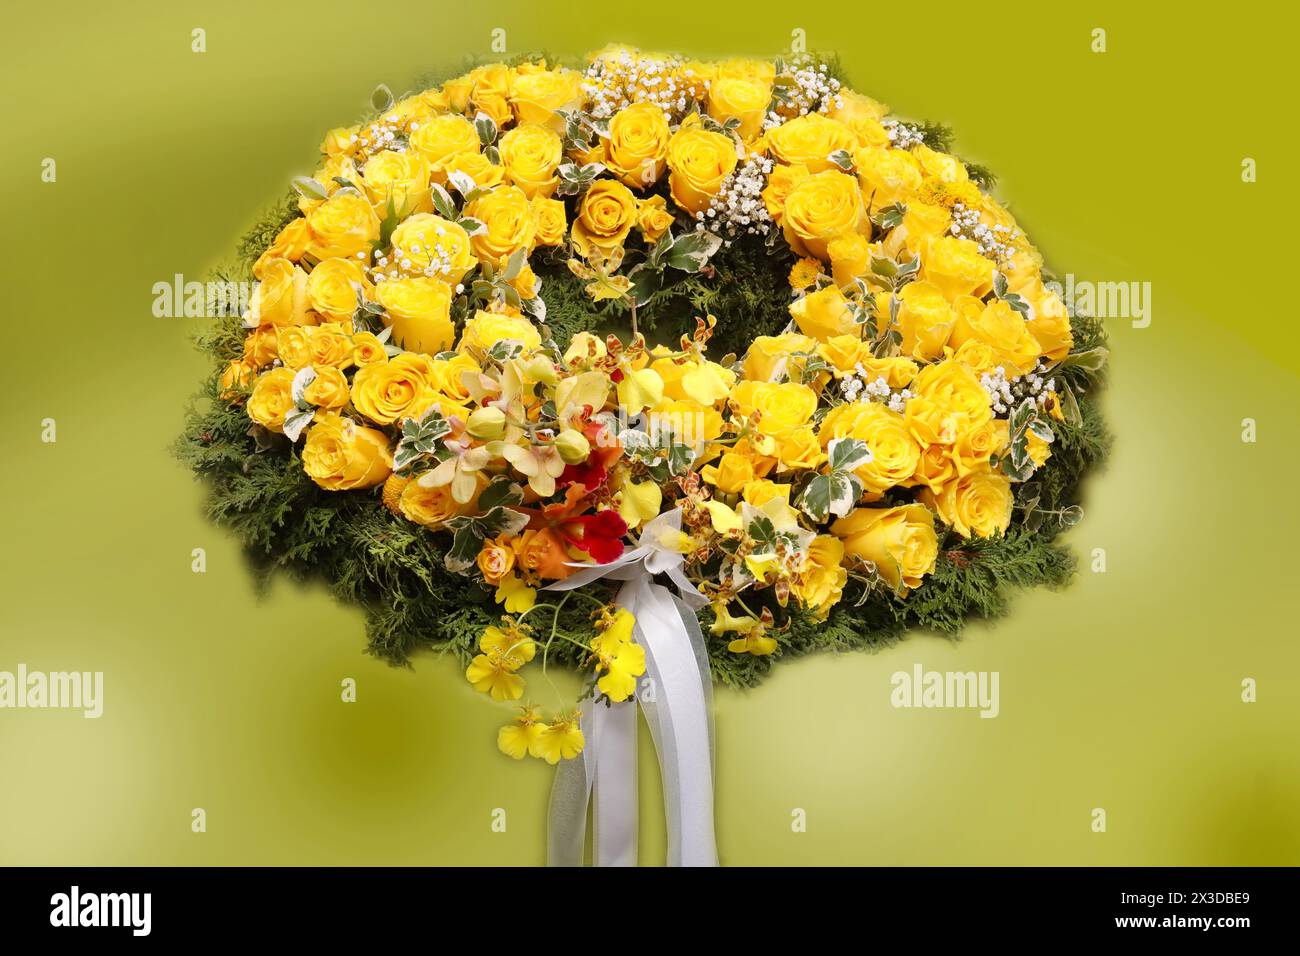 funeral wreath with yellow rose blossoms Stock Photo